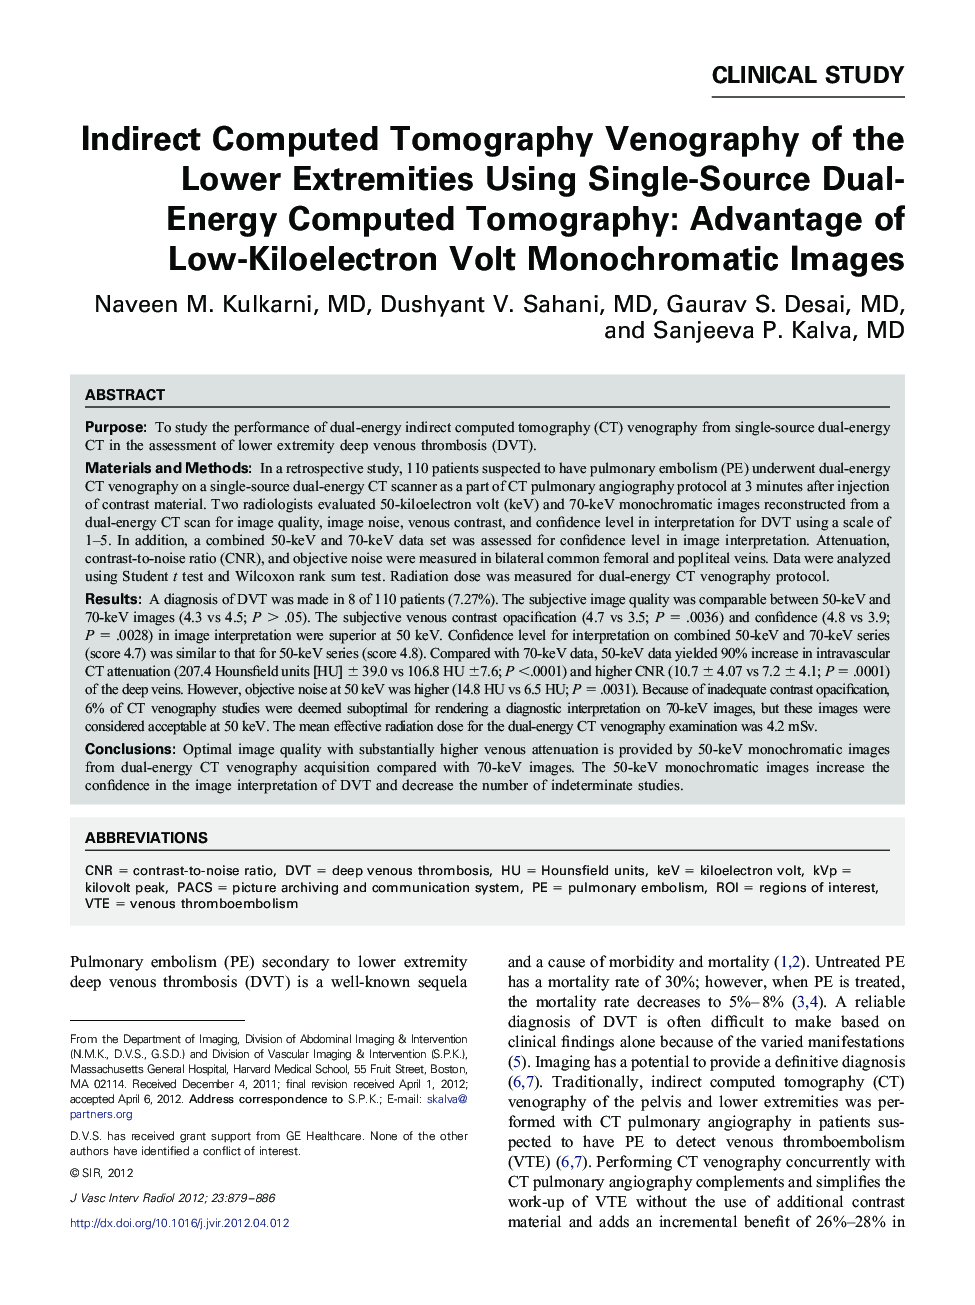 Indirect Computed Tomography Venography of the Lower Extremities Using Single-Source Dual-Energy Computed Tomography: Advantage of Low-Kiloelectron Volt Monochromatic Images